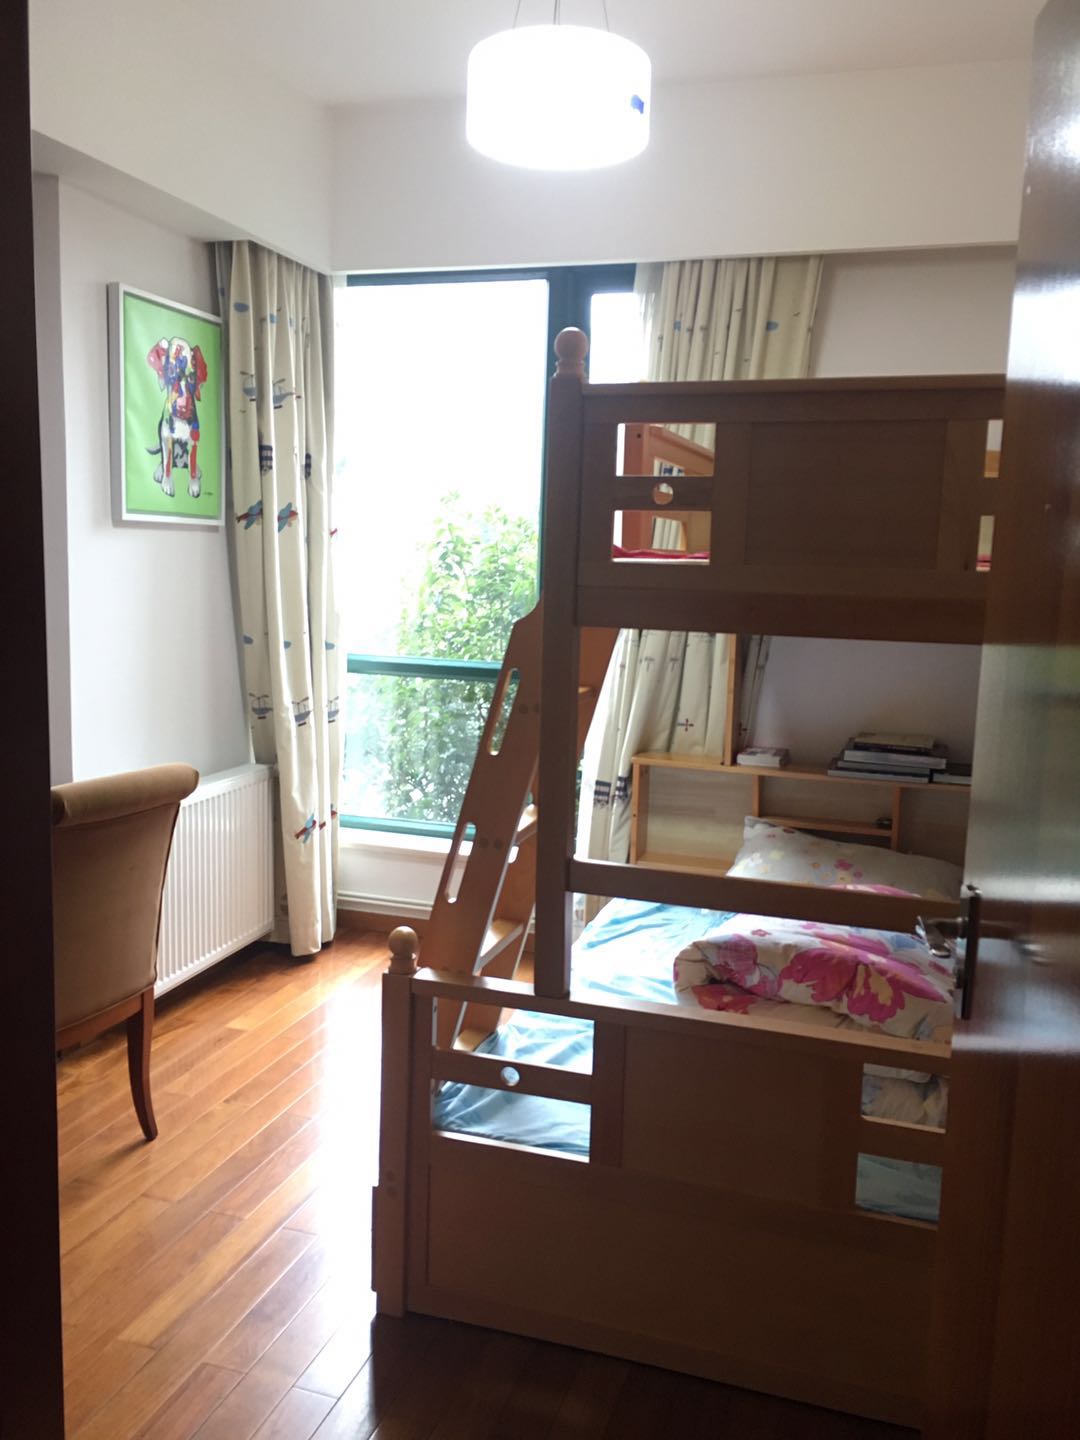 New Apartment For Rent in Shanghai Yanlord-Puxi Renovated Spacious Apartment for Rent in Shanghai